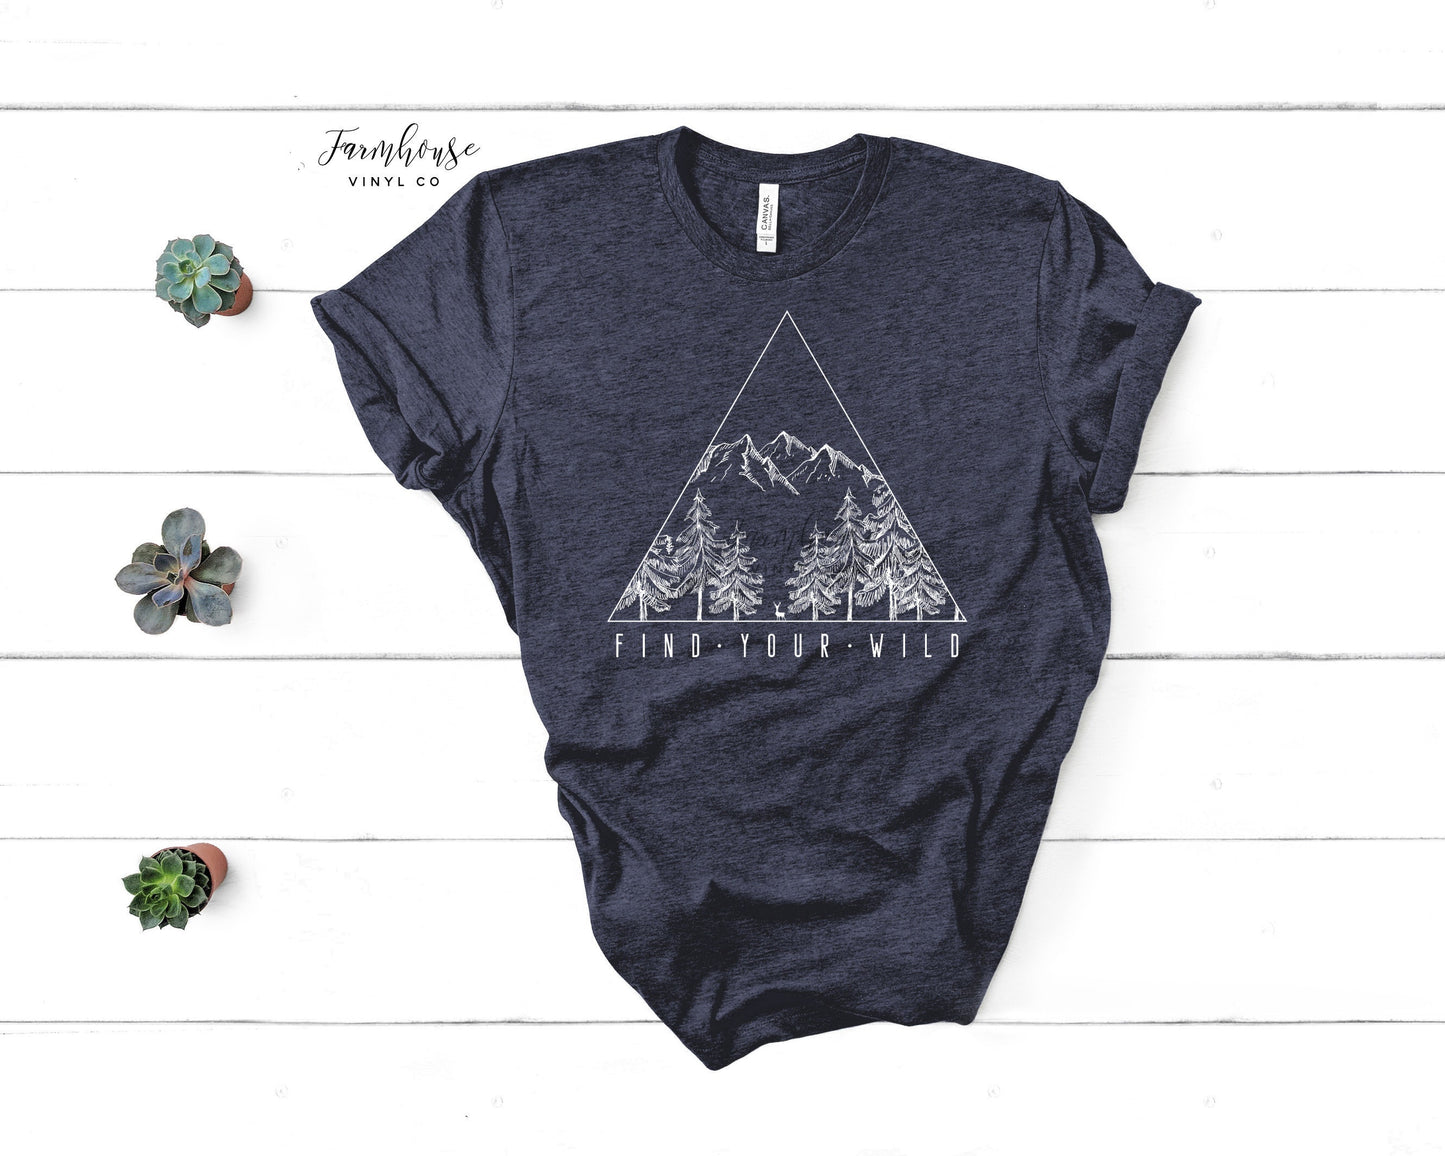 Find Your Wild Mountain Outdoor Hiking Camp Unisex Shirt / Camping Shirt / Hiking Gear / Mens Shirts / Outdoor Explorer / Get Outside Tees - Farmhouse Vinyl Co